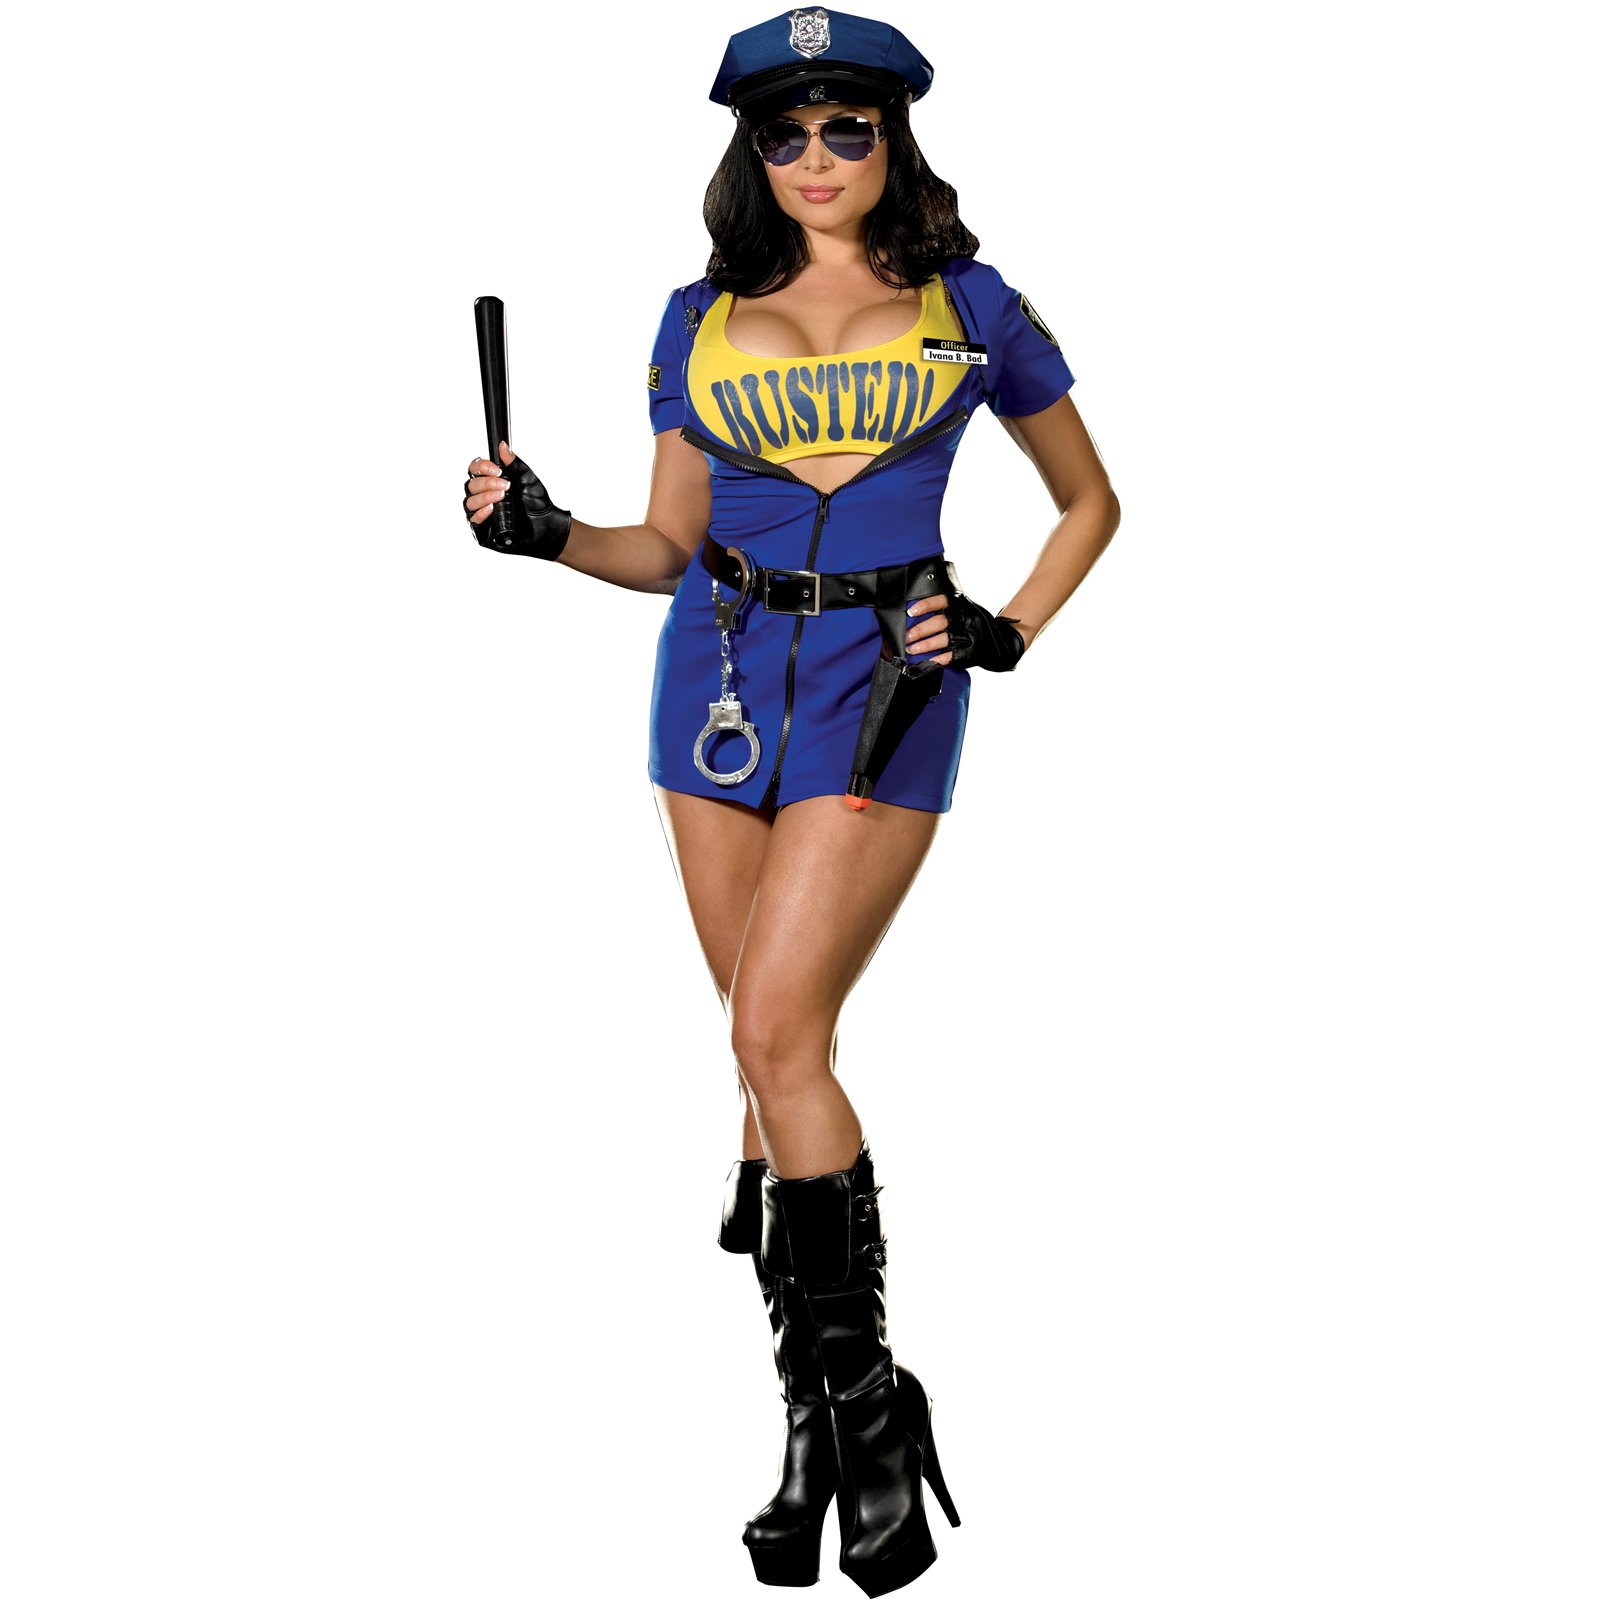 Busted Adult Plus Costume - Click Image to Close